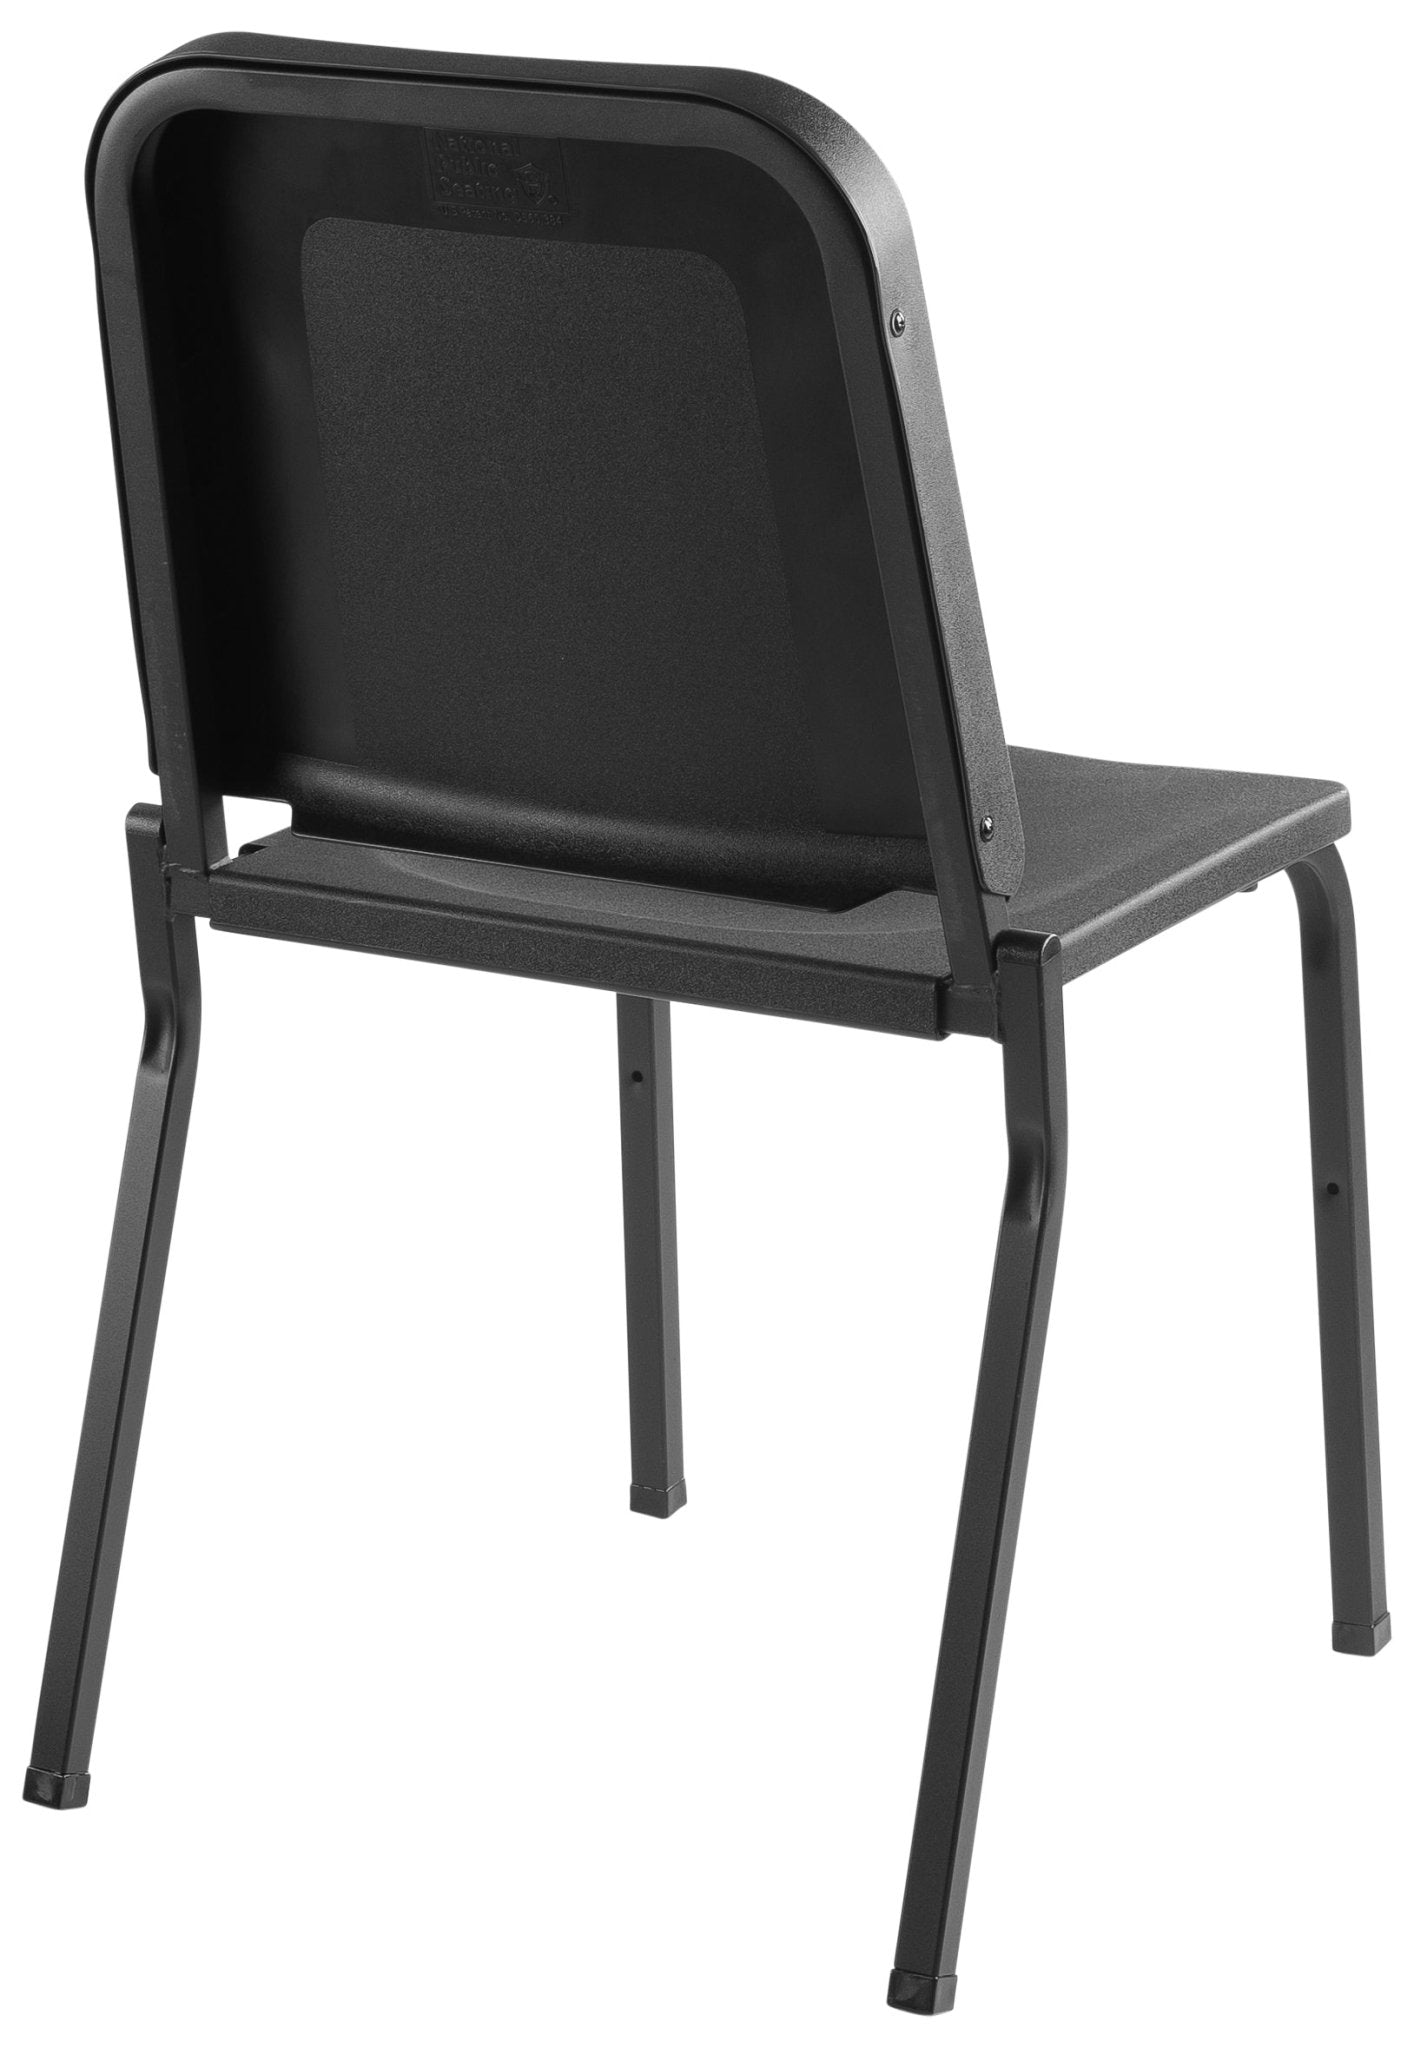 NPS 8200 Series Melody Band Music Chair 17.5"H (National Public Seating NPS-8210) - SchoolOutlet